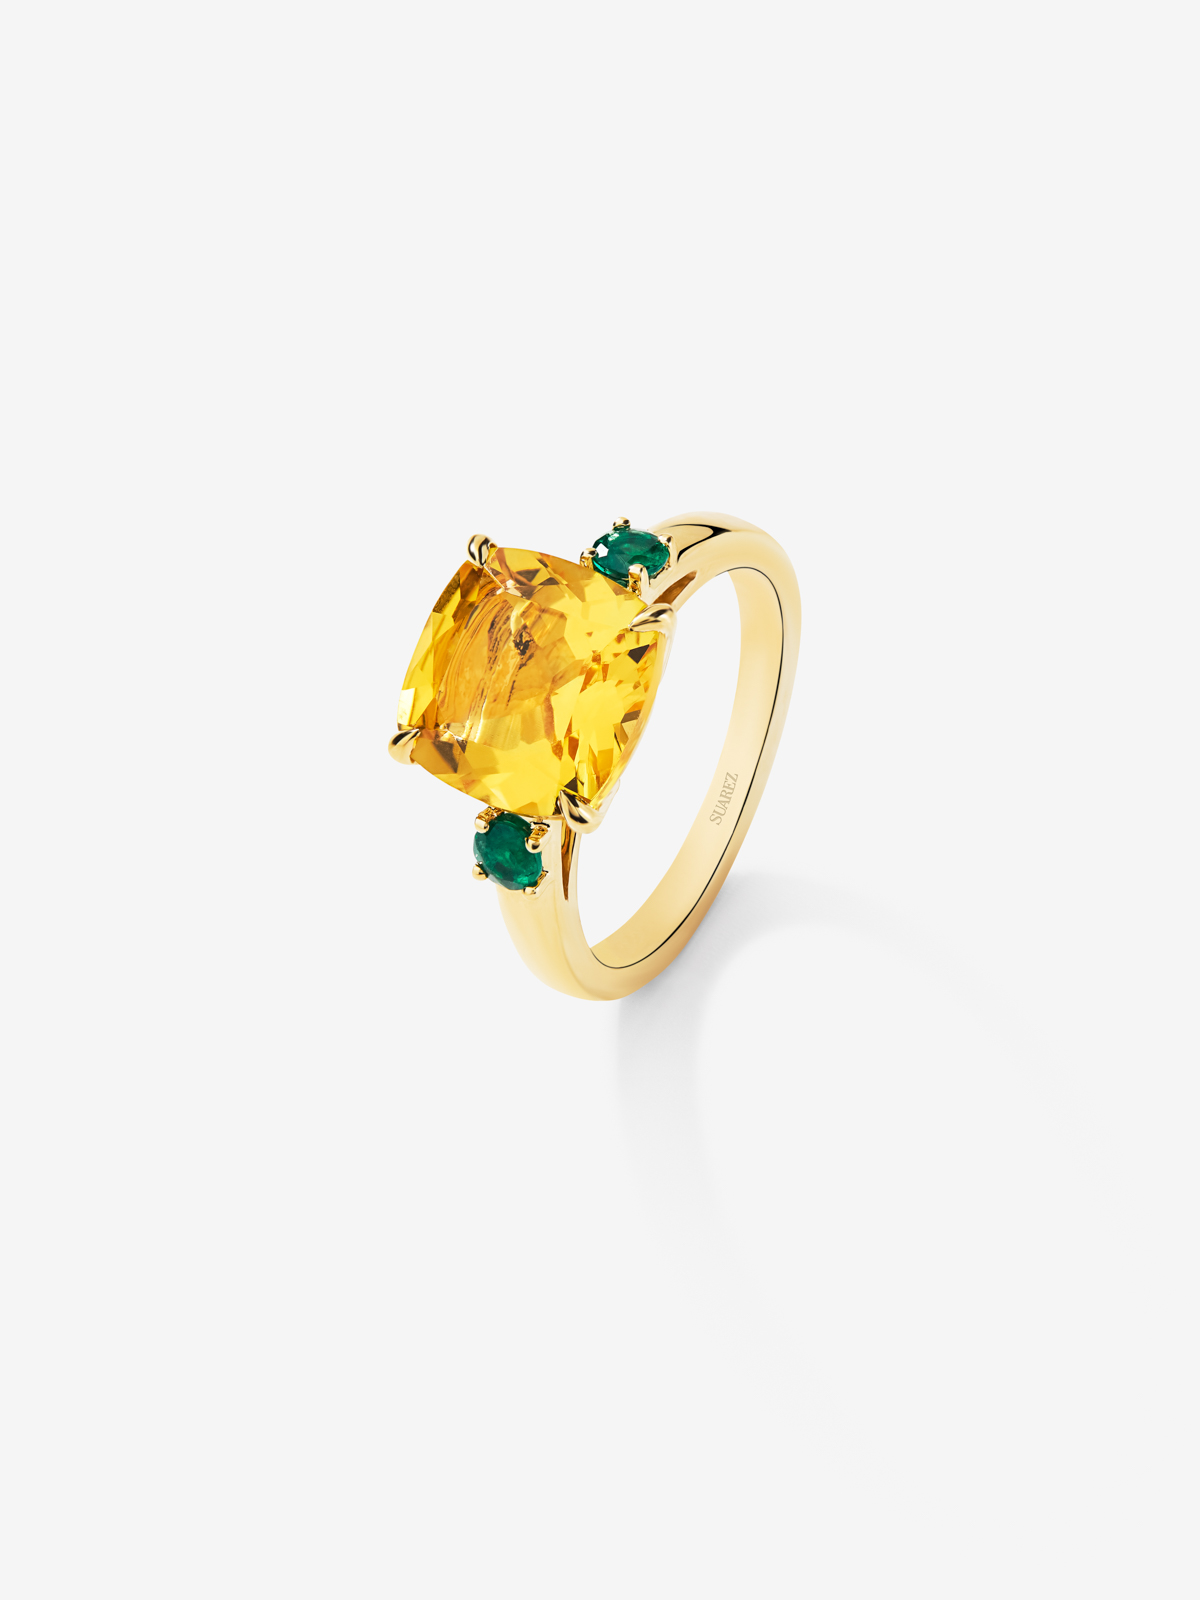 18k yellow golden ring with citrine quartz in 3.55 cts and green cushion size in bright 0.25 cts